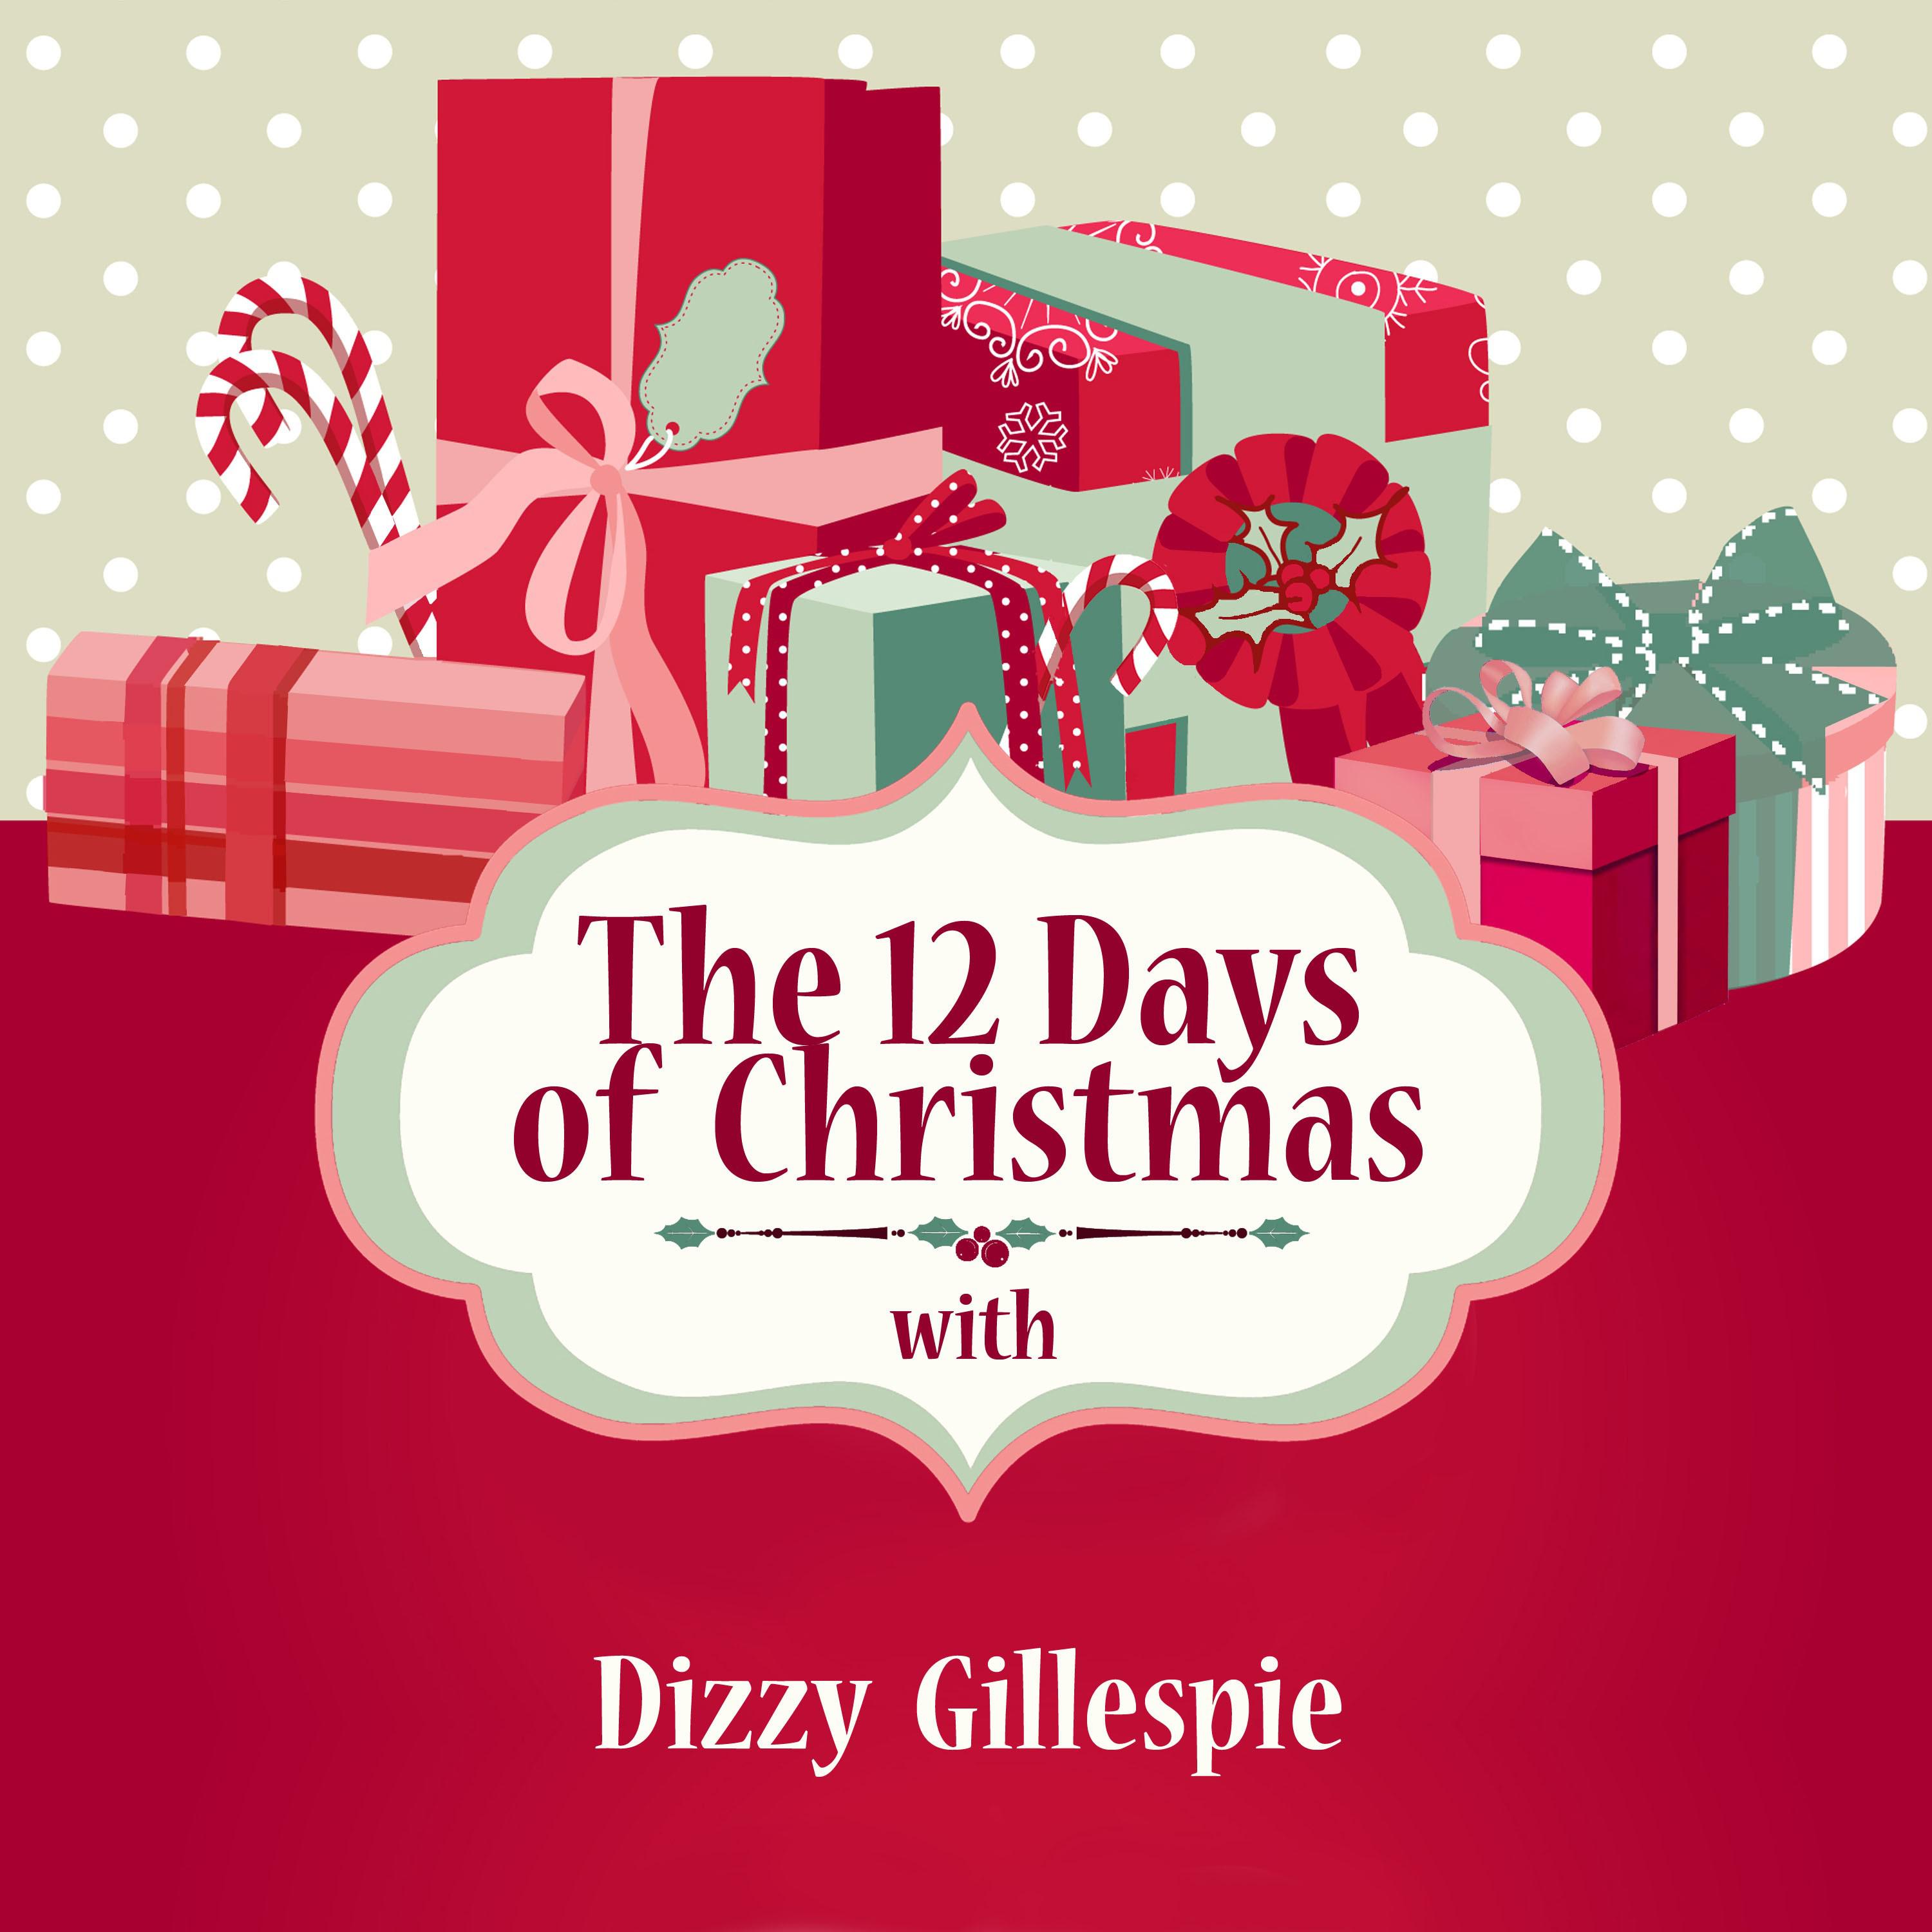 The 12 Days of Christmas with Dizzy Gillespie